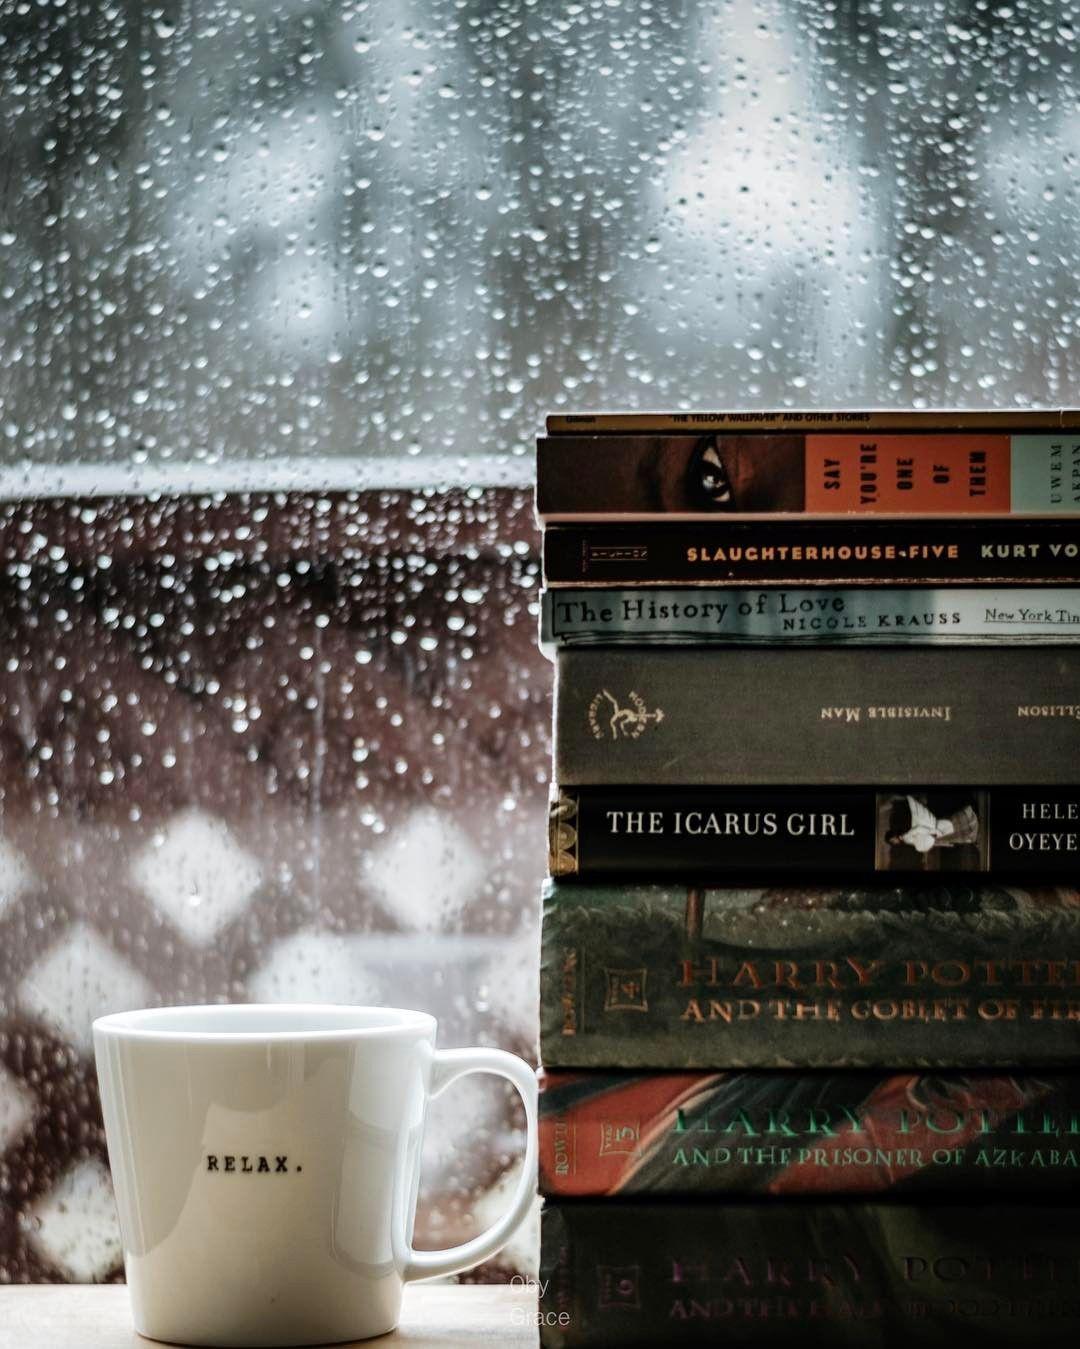 Coffee and books and maybe a little rain. Pitter patter